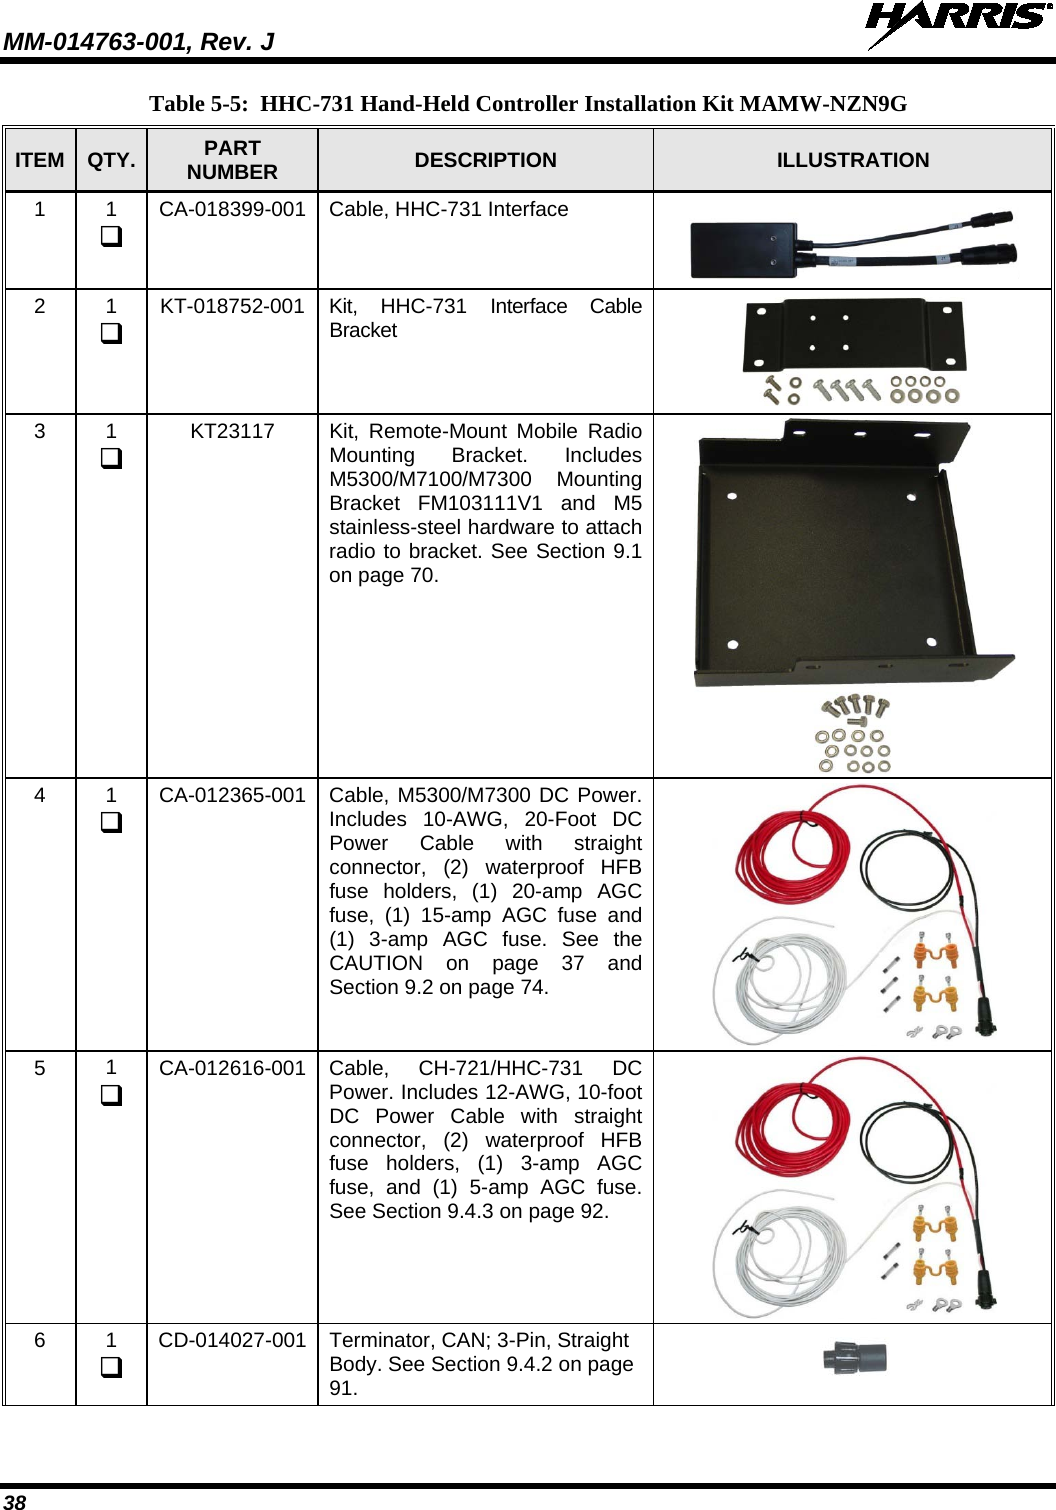 MM-014763-001, Rev. J   38 Table 5-5:  HHC-731 Hand-Held Controller Installation Kit MAMW-NZN9G ITEM QTY. PART NUMBER DESCRIPTION  ILLUSTRATION 1  1  CA-018399-001 Cable, HHC-731 Interface  2  1  KT-018752-001 Kit, HHC-731 Interface Cable Bracket  3  1  KT23117 Kit, Remote-Mount Mobile Radio Mounting Bracket. Includes M5300/M7100/M7300 Mounting Bracket FM103111V1 and M5 stainless-steel hardware to attach radio to bracket. See Section 9.1 on page 70.  4  1  CA-012365-001 Cable, M5300/M7300 DC Power. Includes 10-AWG, 20-Foot DC Power Cable with straight connector, (2) waterproof HFB fuse holders, (1) 20-amp AGC fuse, (1) 15-amp AGC fuse and (1) 3-amp AGC fuse. See the CAUTION  on page 37 and Section 9.2 on page 74.  5  1  CA-012616-001 Cable, CH-721/HHC-731 DC Power. Includes 12-AWG, 10-foot DC Power Cable with straight connector, (2) waterproof HFB fuse holders, (1)  3-amp AGC fuse, and (1) 5-amp AGC fuse. See Section 9.4.3 on page 92.  6  1  CD-014027-001 Terminator, CAN; 3-Pin, Straight Body. See Section 9.4.2 on page 91.      